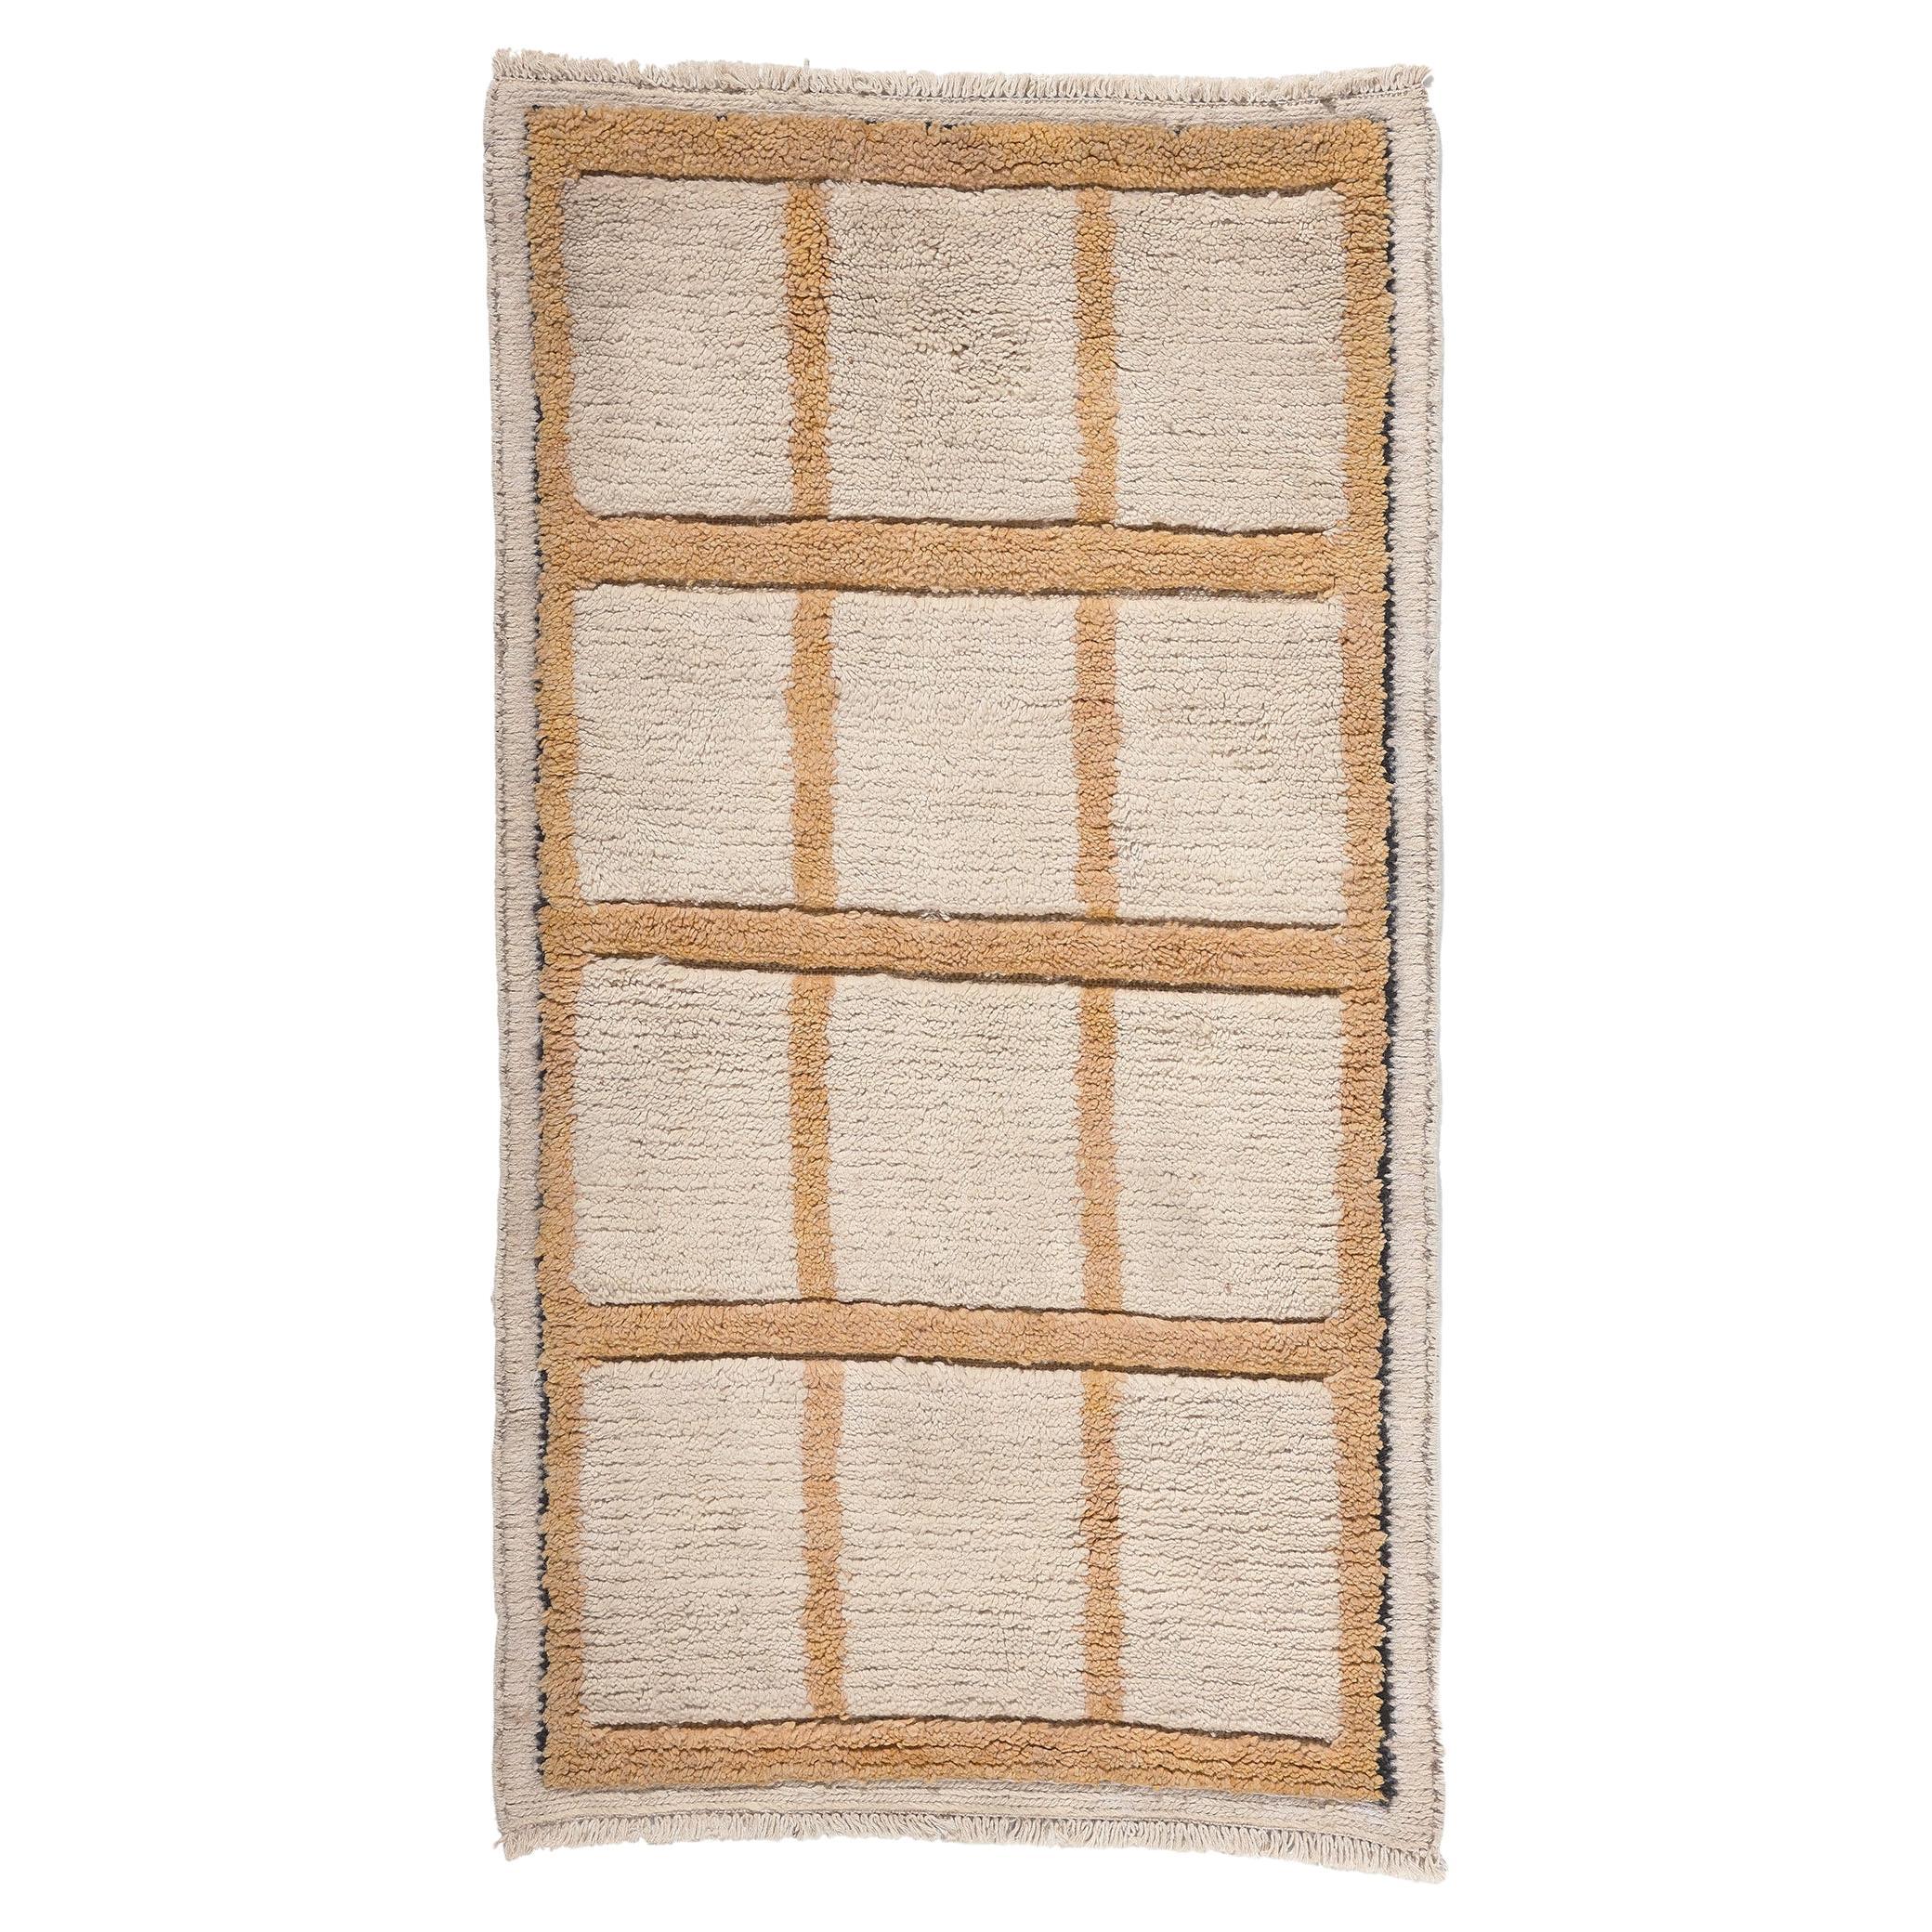 Modern Moroccan Rug with Neutral Earth-Tone Colors For Sale